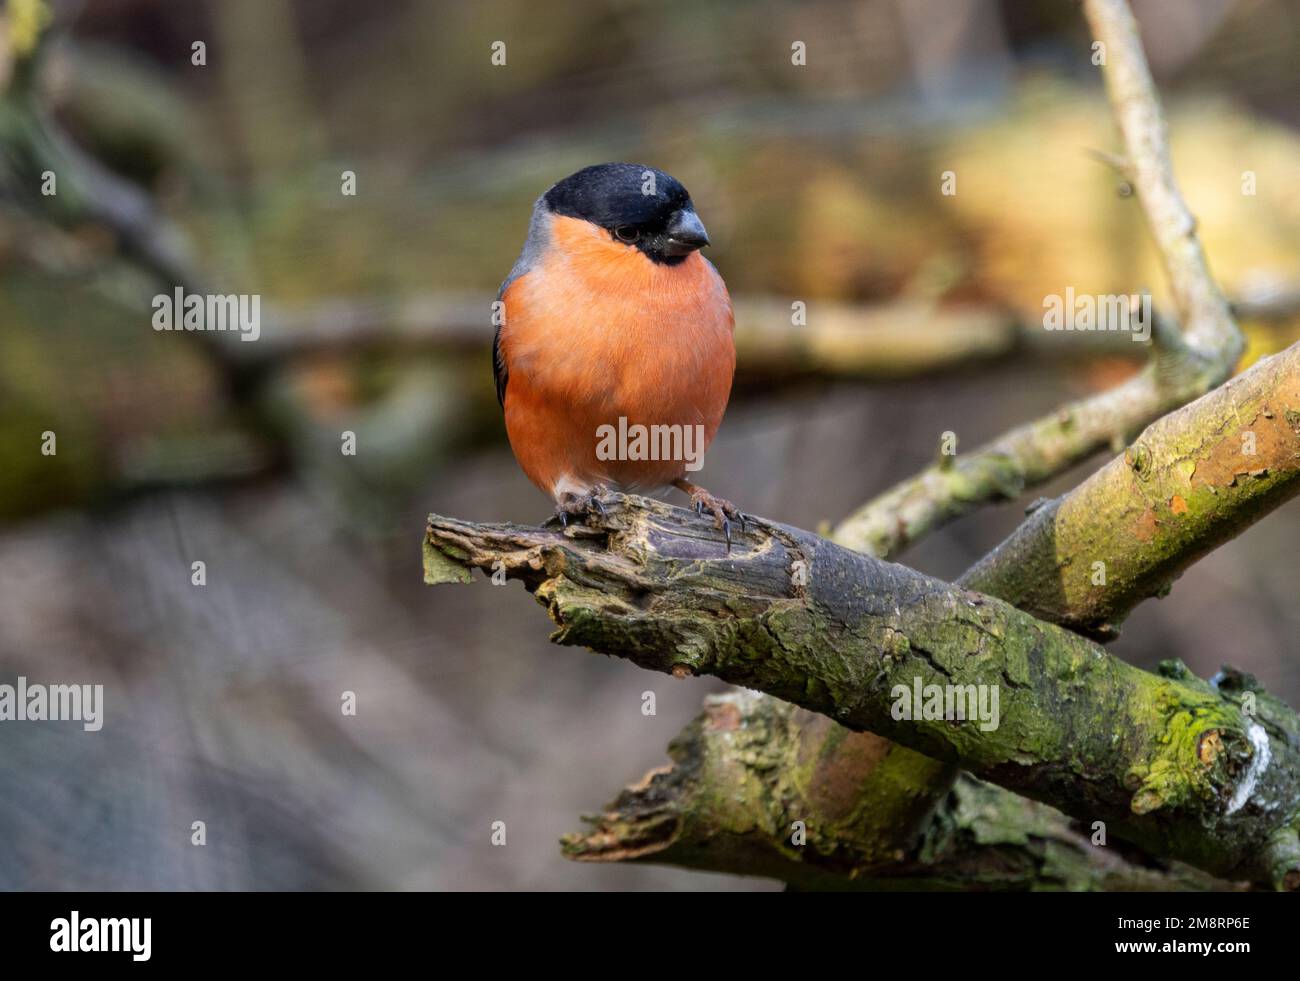 The spectacular colour of the male Bullfinch stands out as they visit the bird feeders in winter. They are shy and spend most of their time high up. Stock Photo